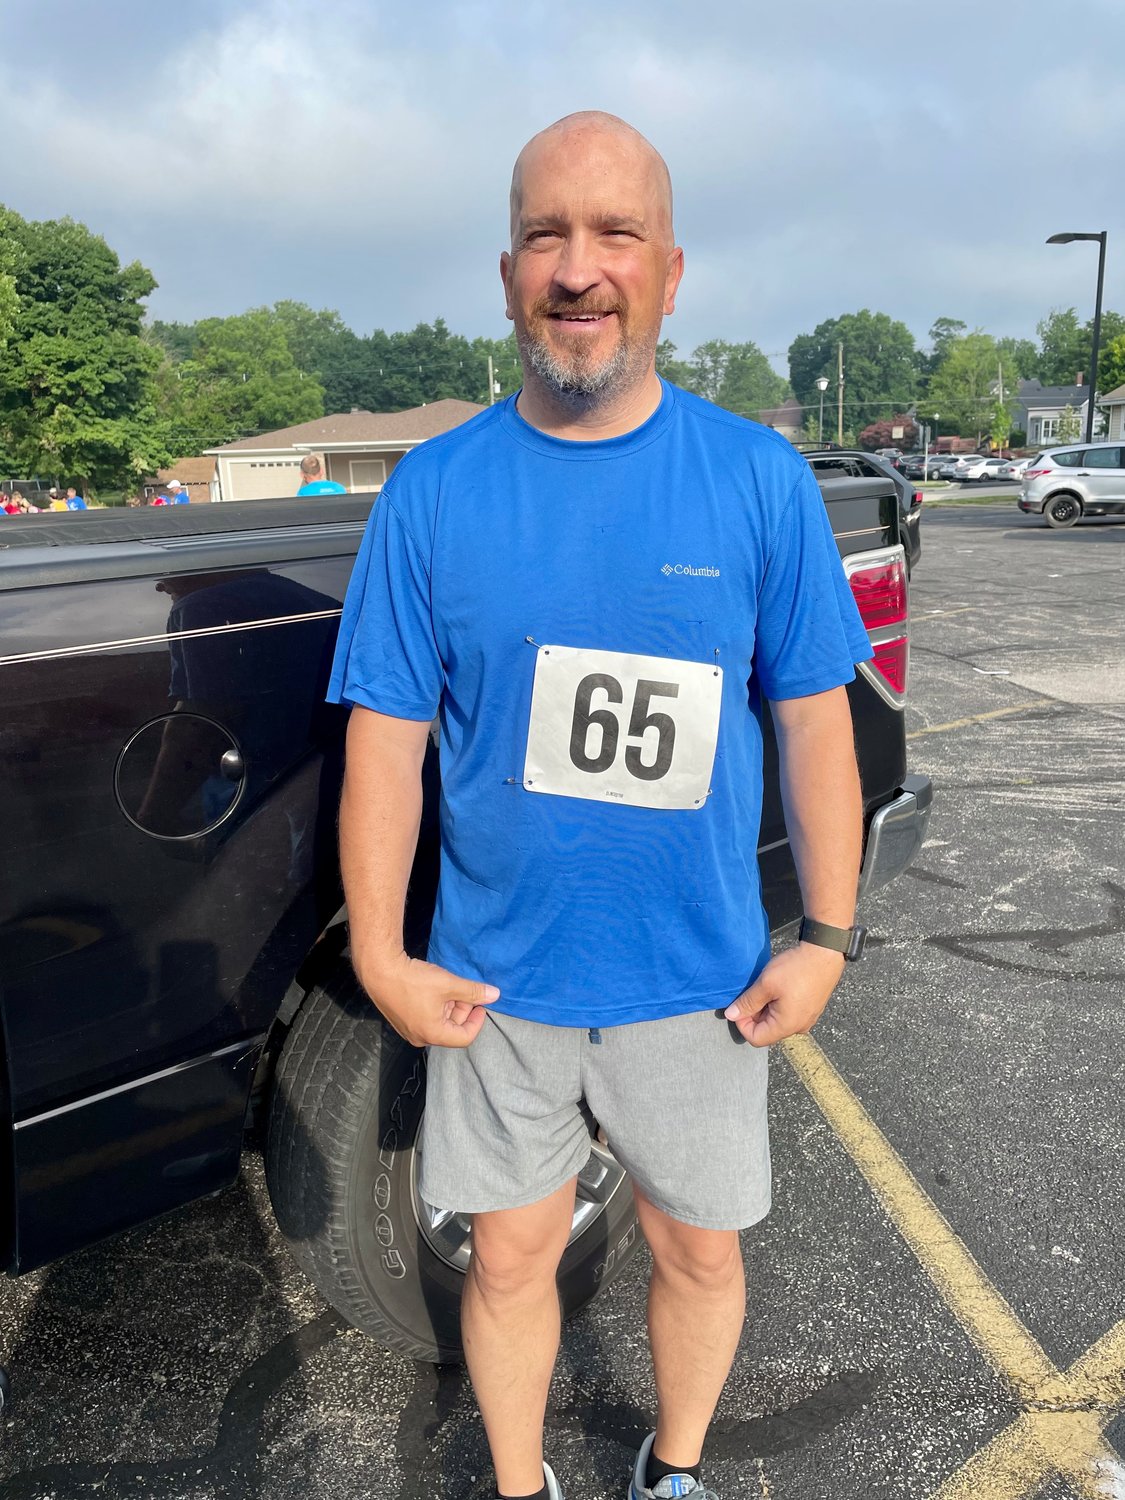 Earlier this month Smith ran a 5K here in Crawfordsville in honor of his uncle who was a long-time cross country coach.